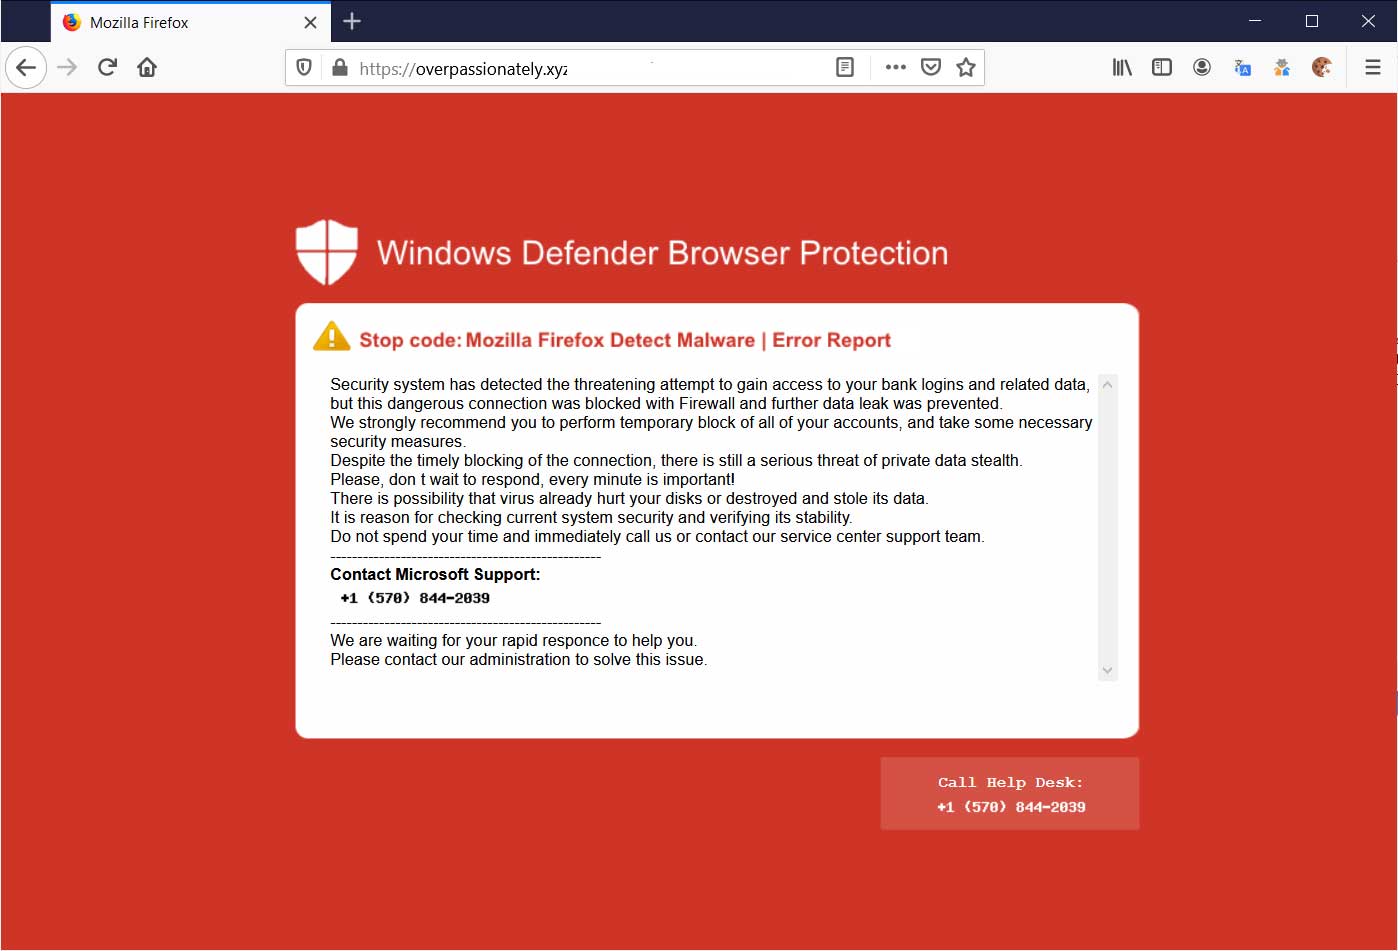 Windows Defender Browser Protection Tech Support Scam